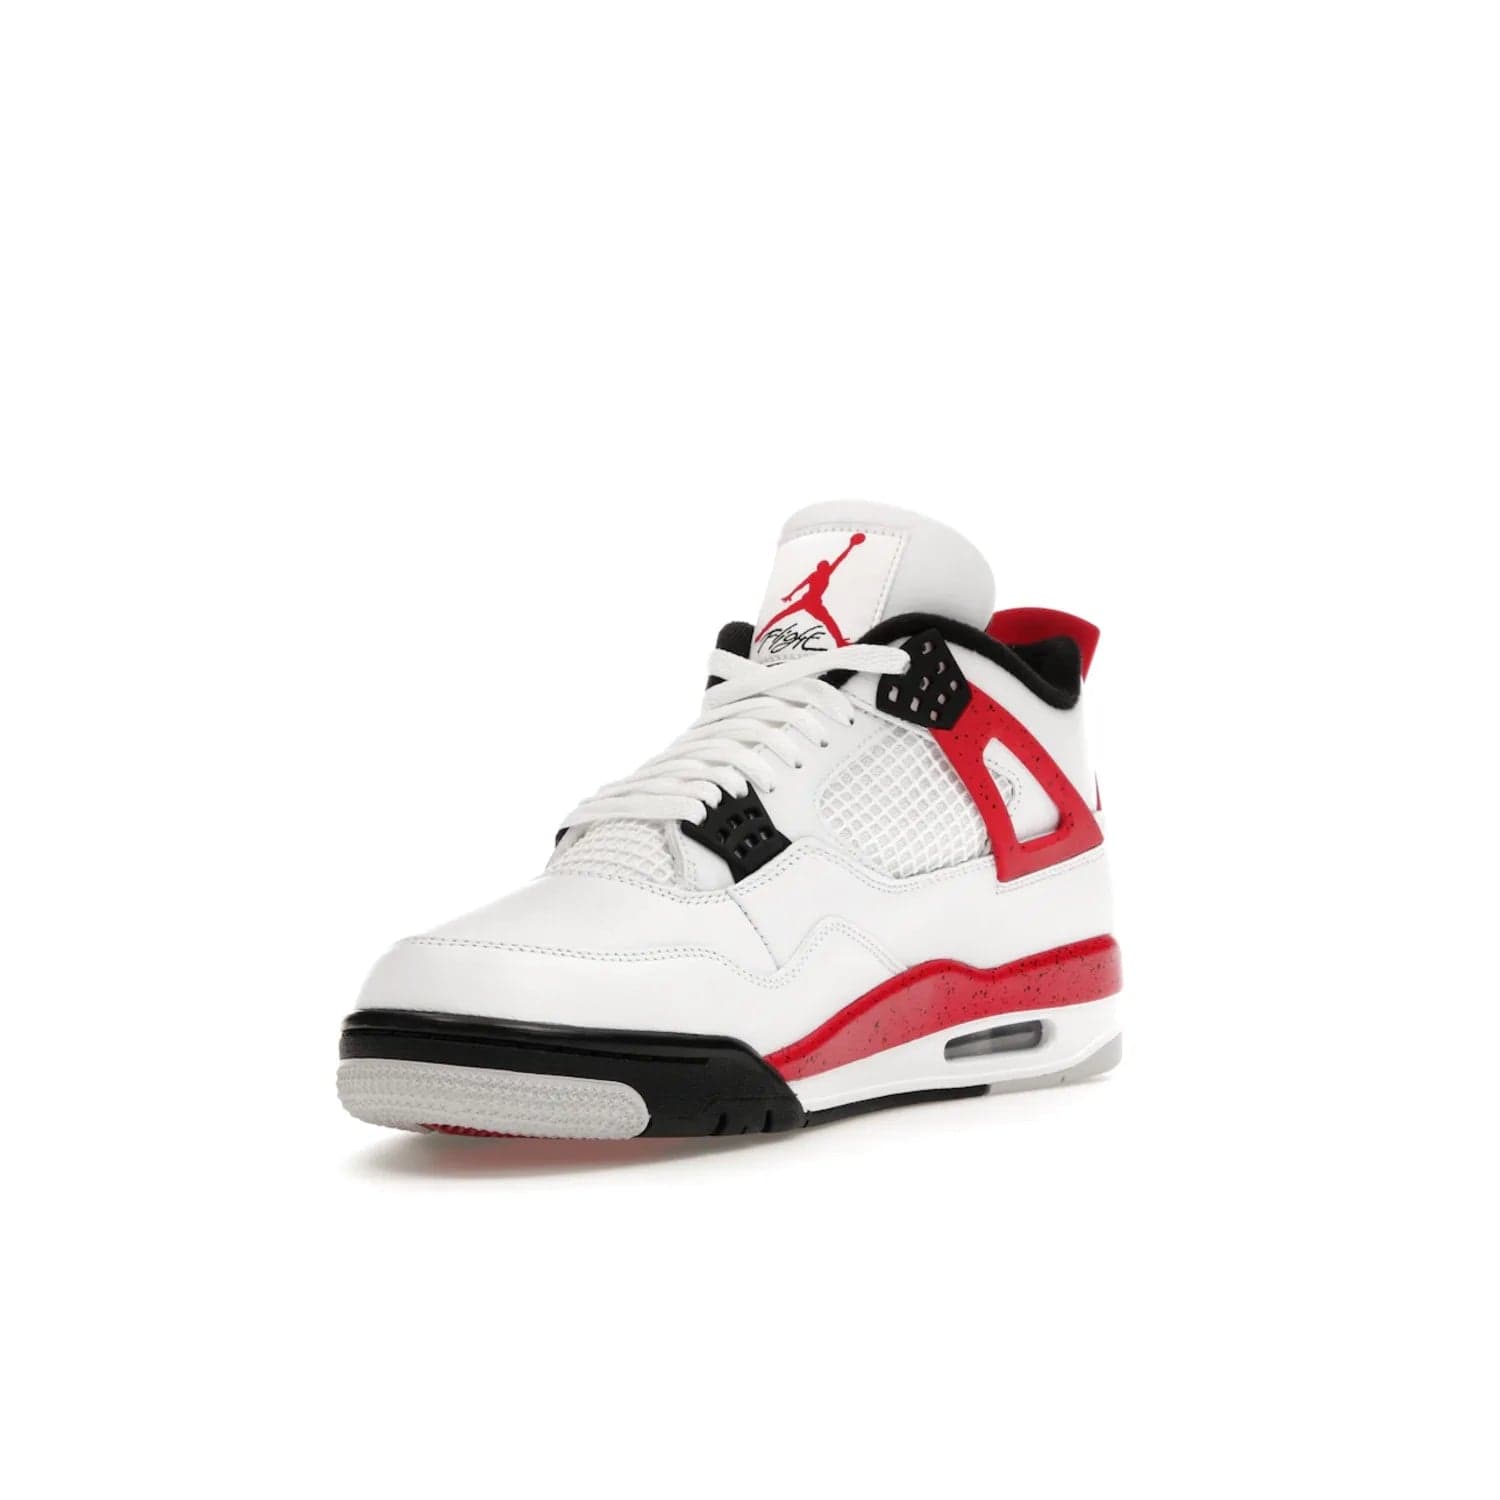 Jordan 4 Retro Red Cement - Image 14 - Only at www.BallersClubKickz.com - Iconic Jordan silhouette with a unique twist. White premium leather uppers with fire red and black detailing. Black, white, and fire red midsole with mesh detailing and Jumpman logo. Jordan 4 Retro Red Cement released with premium price.